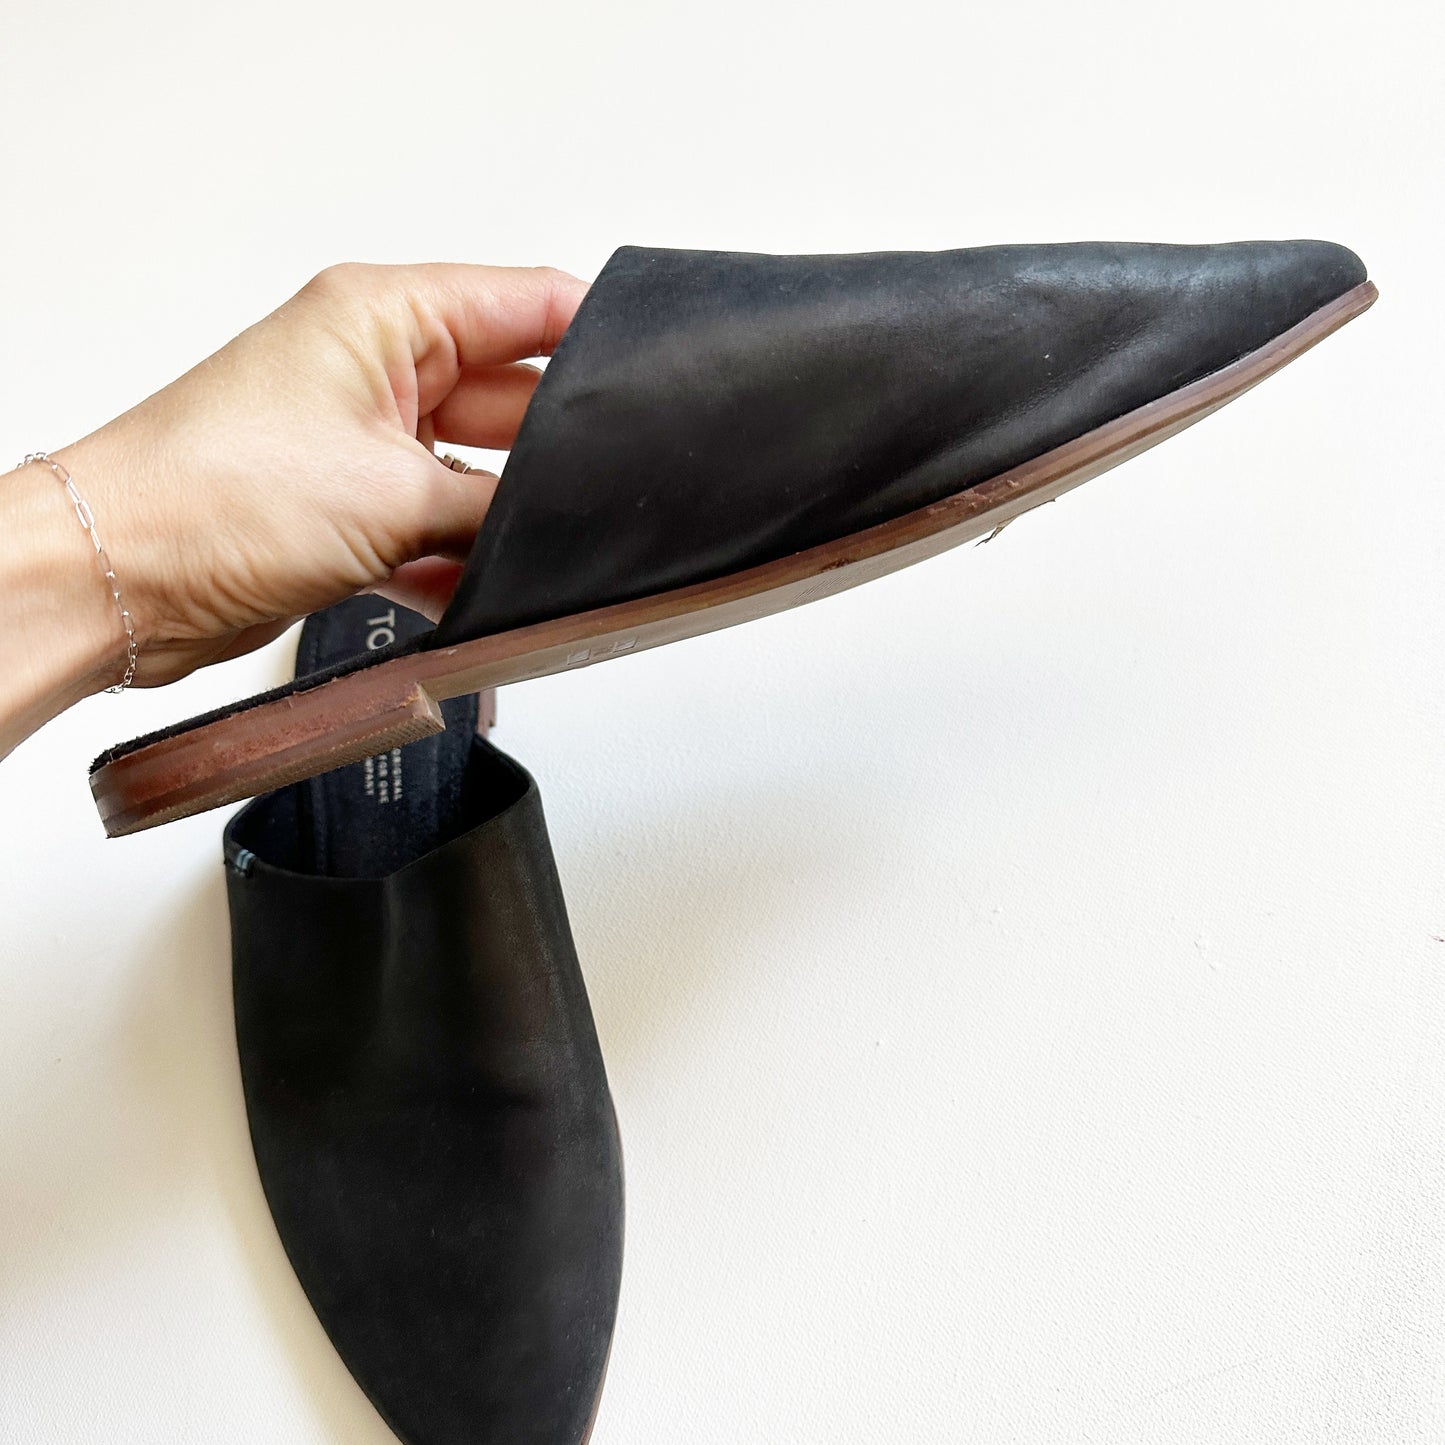 Toms Black Pointed Toe Mules